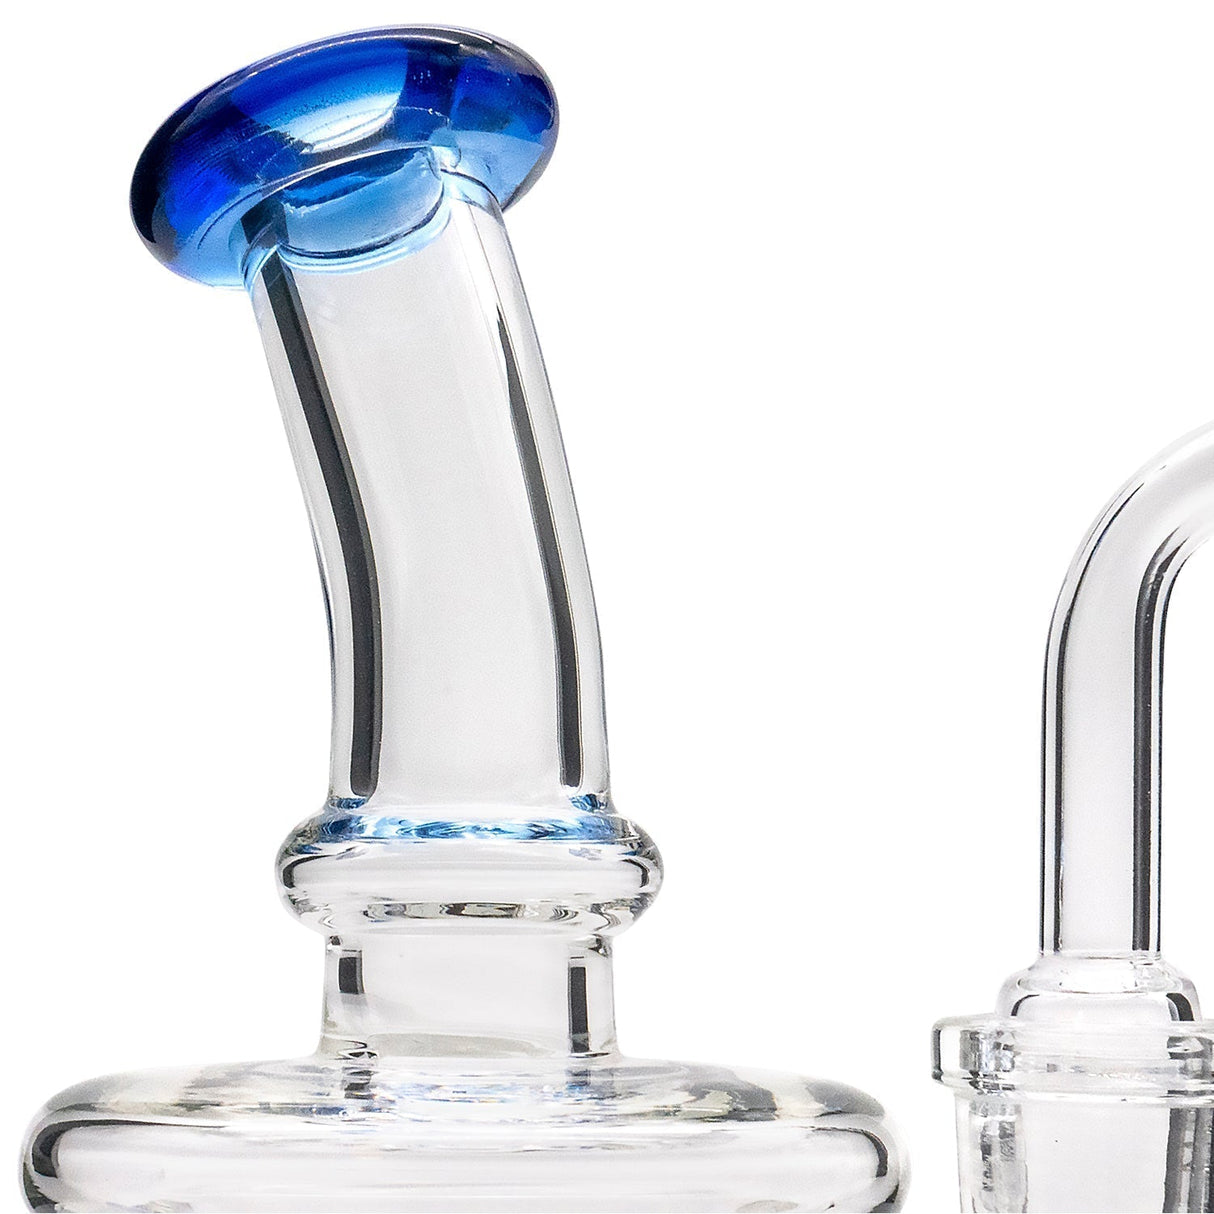 Glassic Compact Barrel Banger Hanger Rig with blue accents, side view, for concentrates